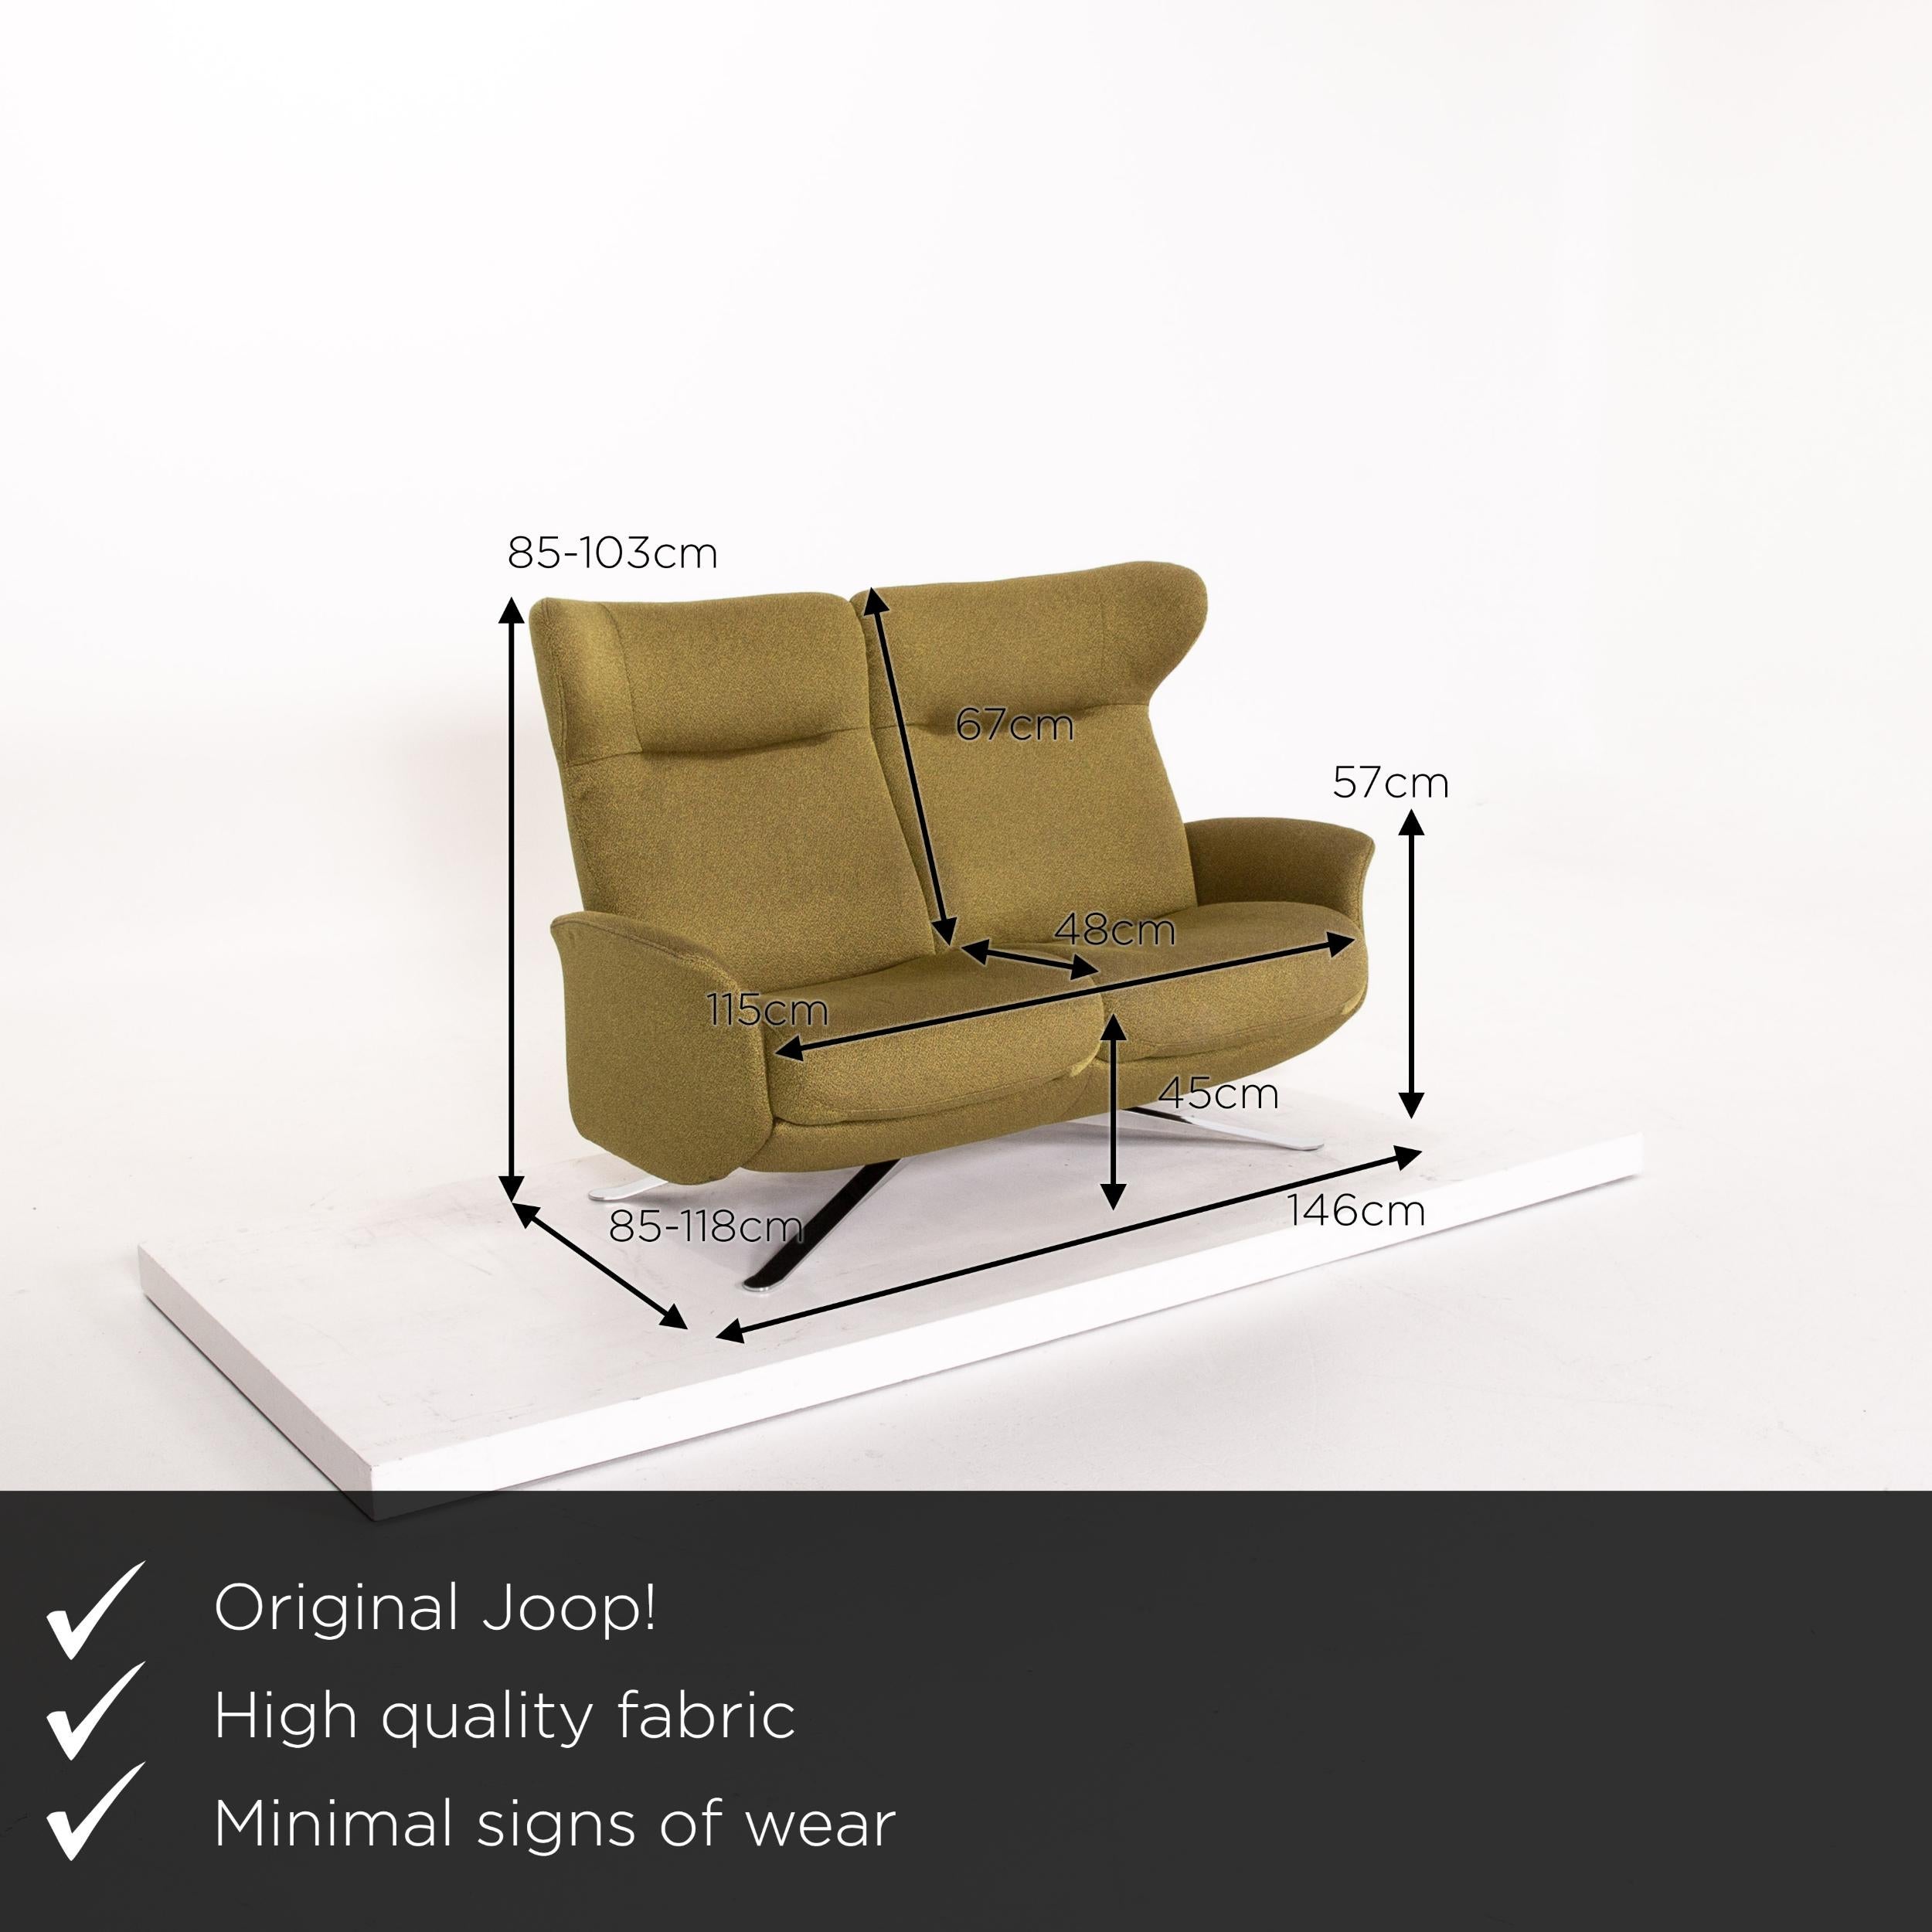 We present to you a Joop! Fabric sofa green olive green two-seat relax function couch.
 

 Product measurements in centimeters:
 

Depth 85
Width 146
Height 85
Seat height 45
Rest height 57
Seat depth 48
Seat width 115
Back height